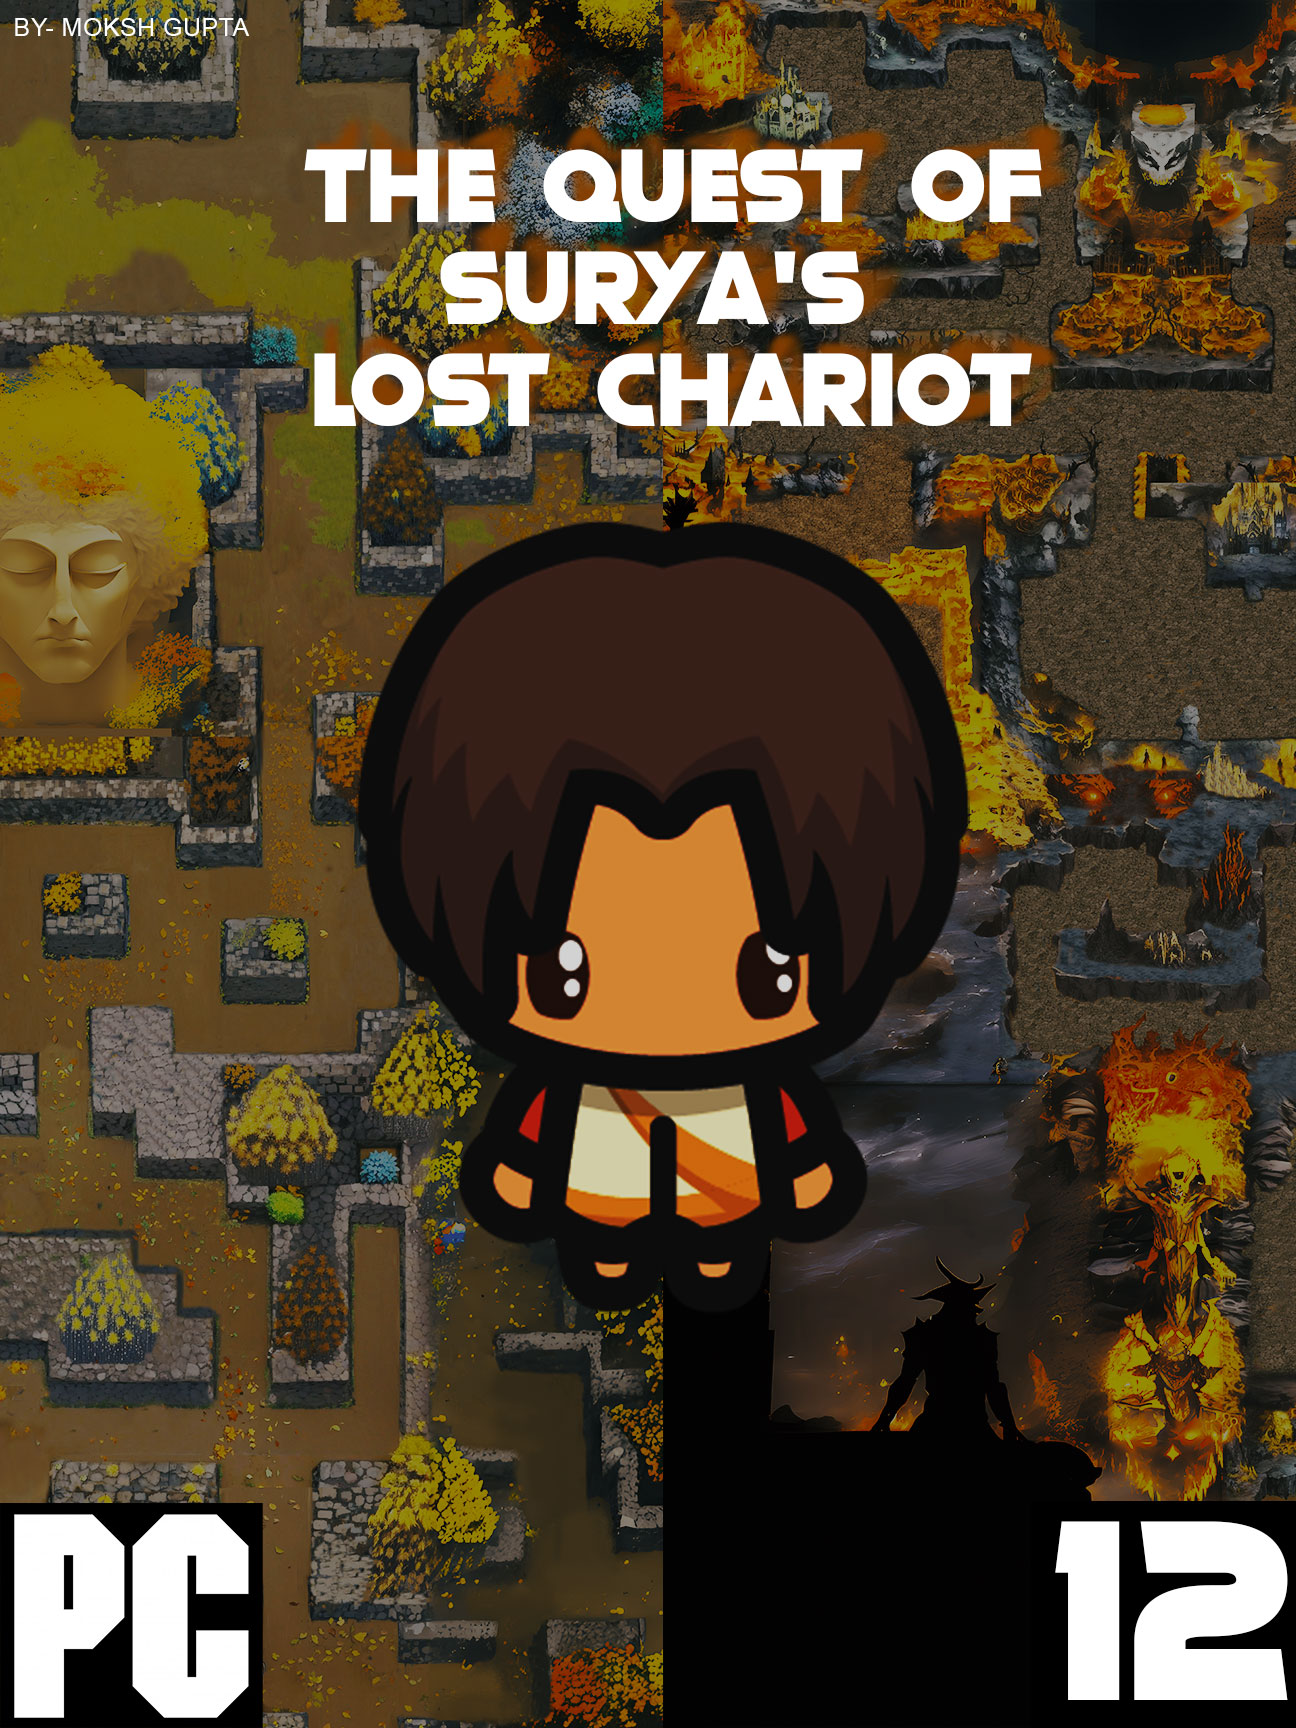 The Quest of Surya's Lost Chariot